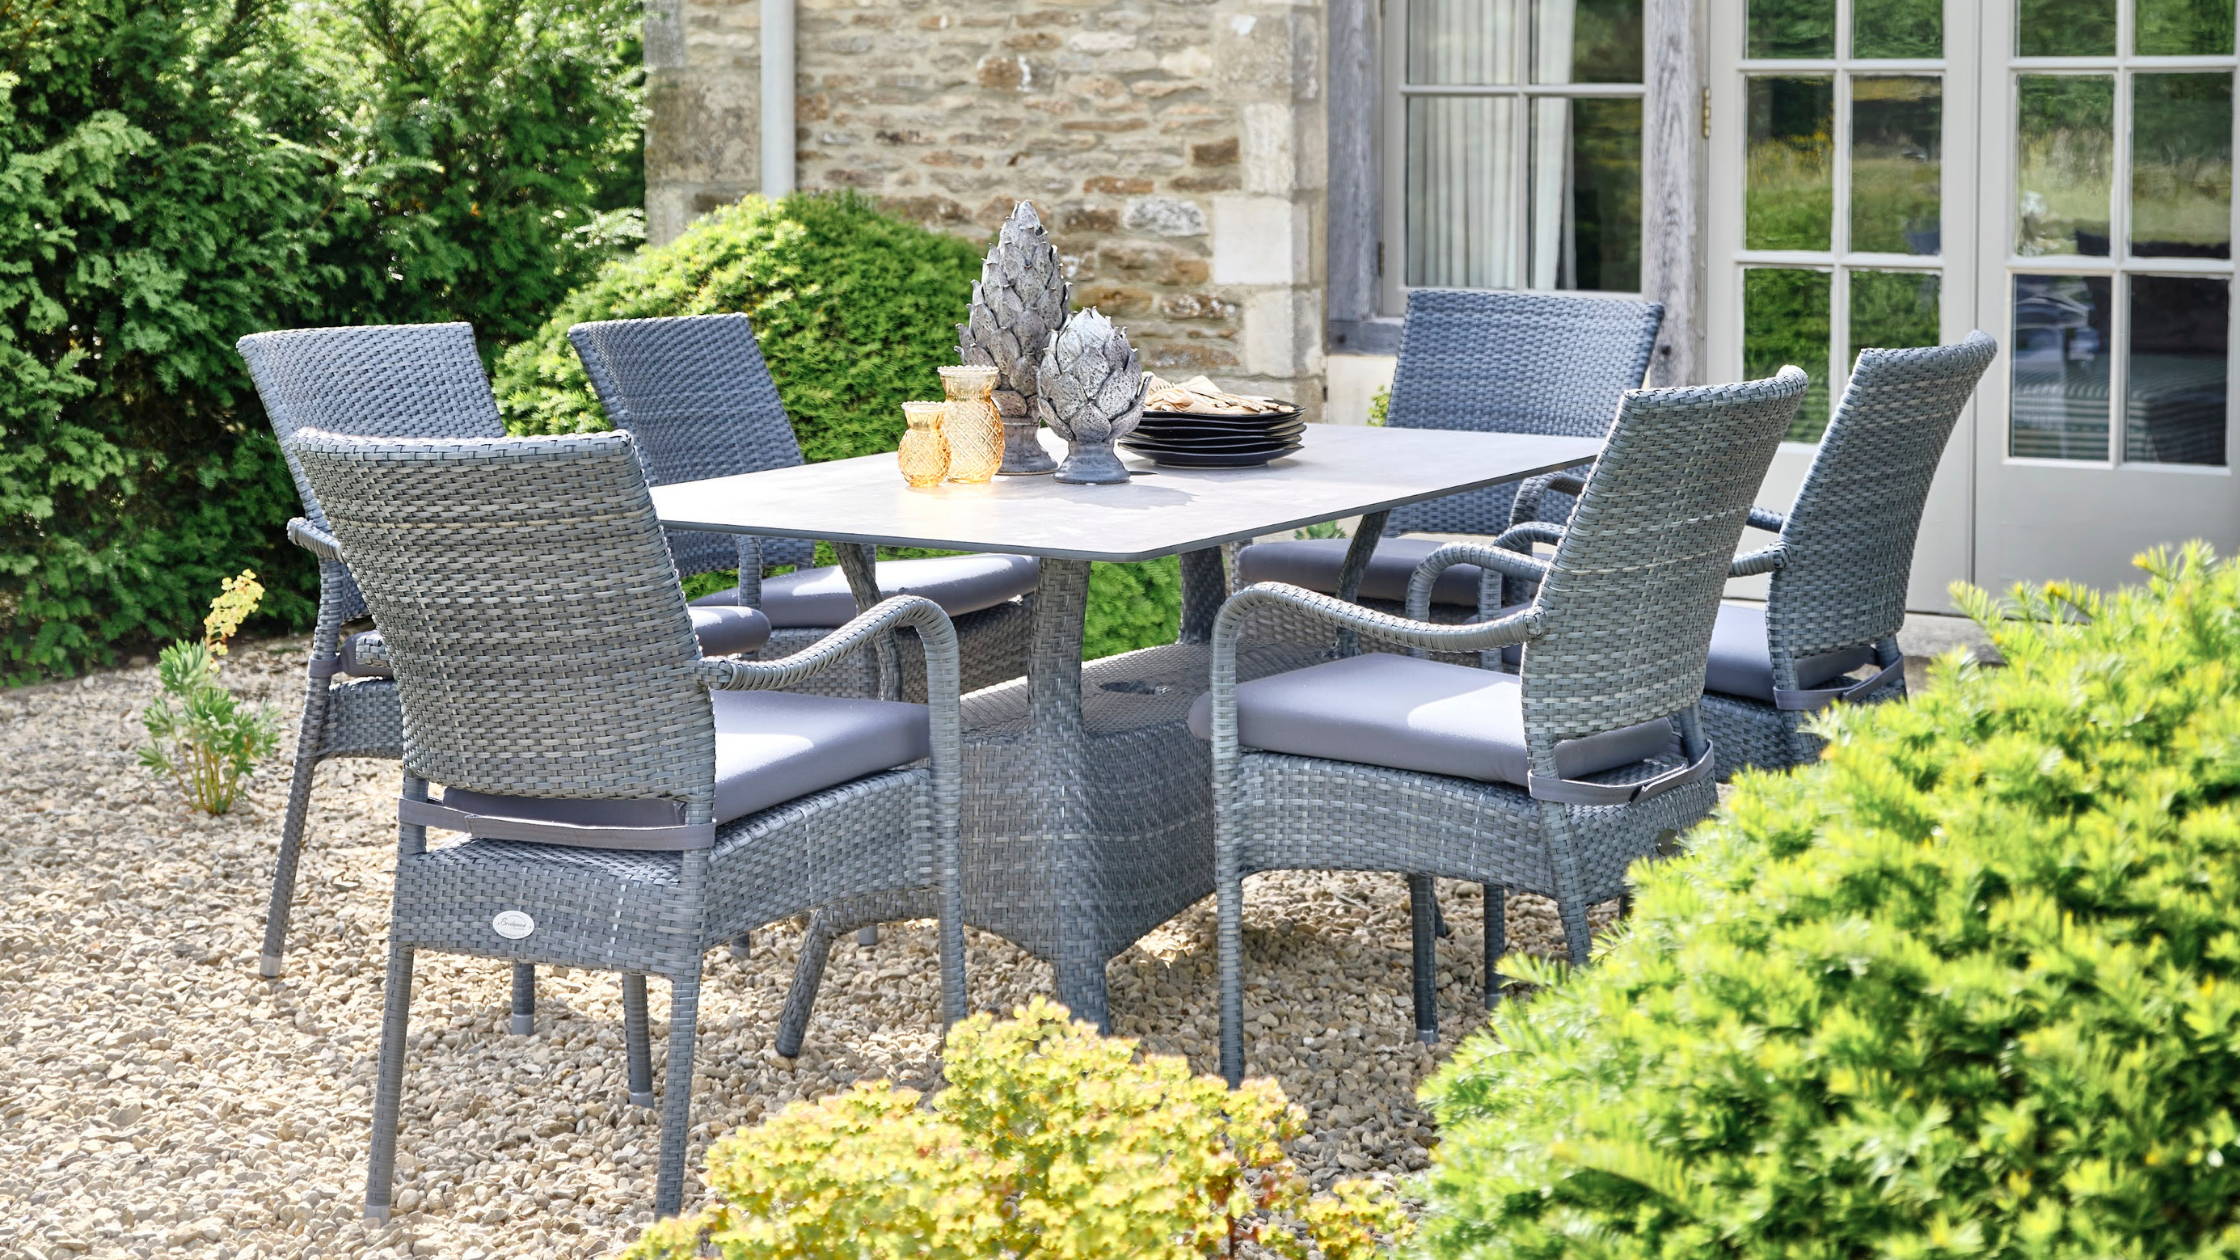 Grey rattan dining set on a shingle patio surrounded by hedges.